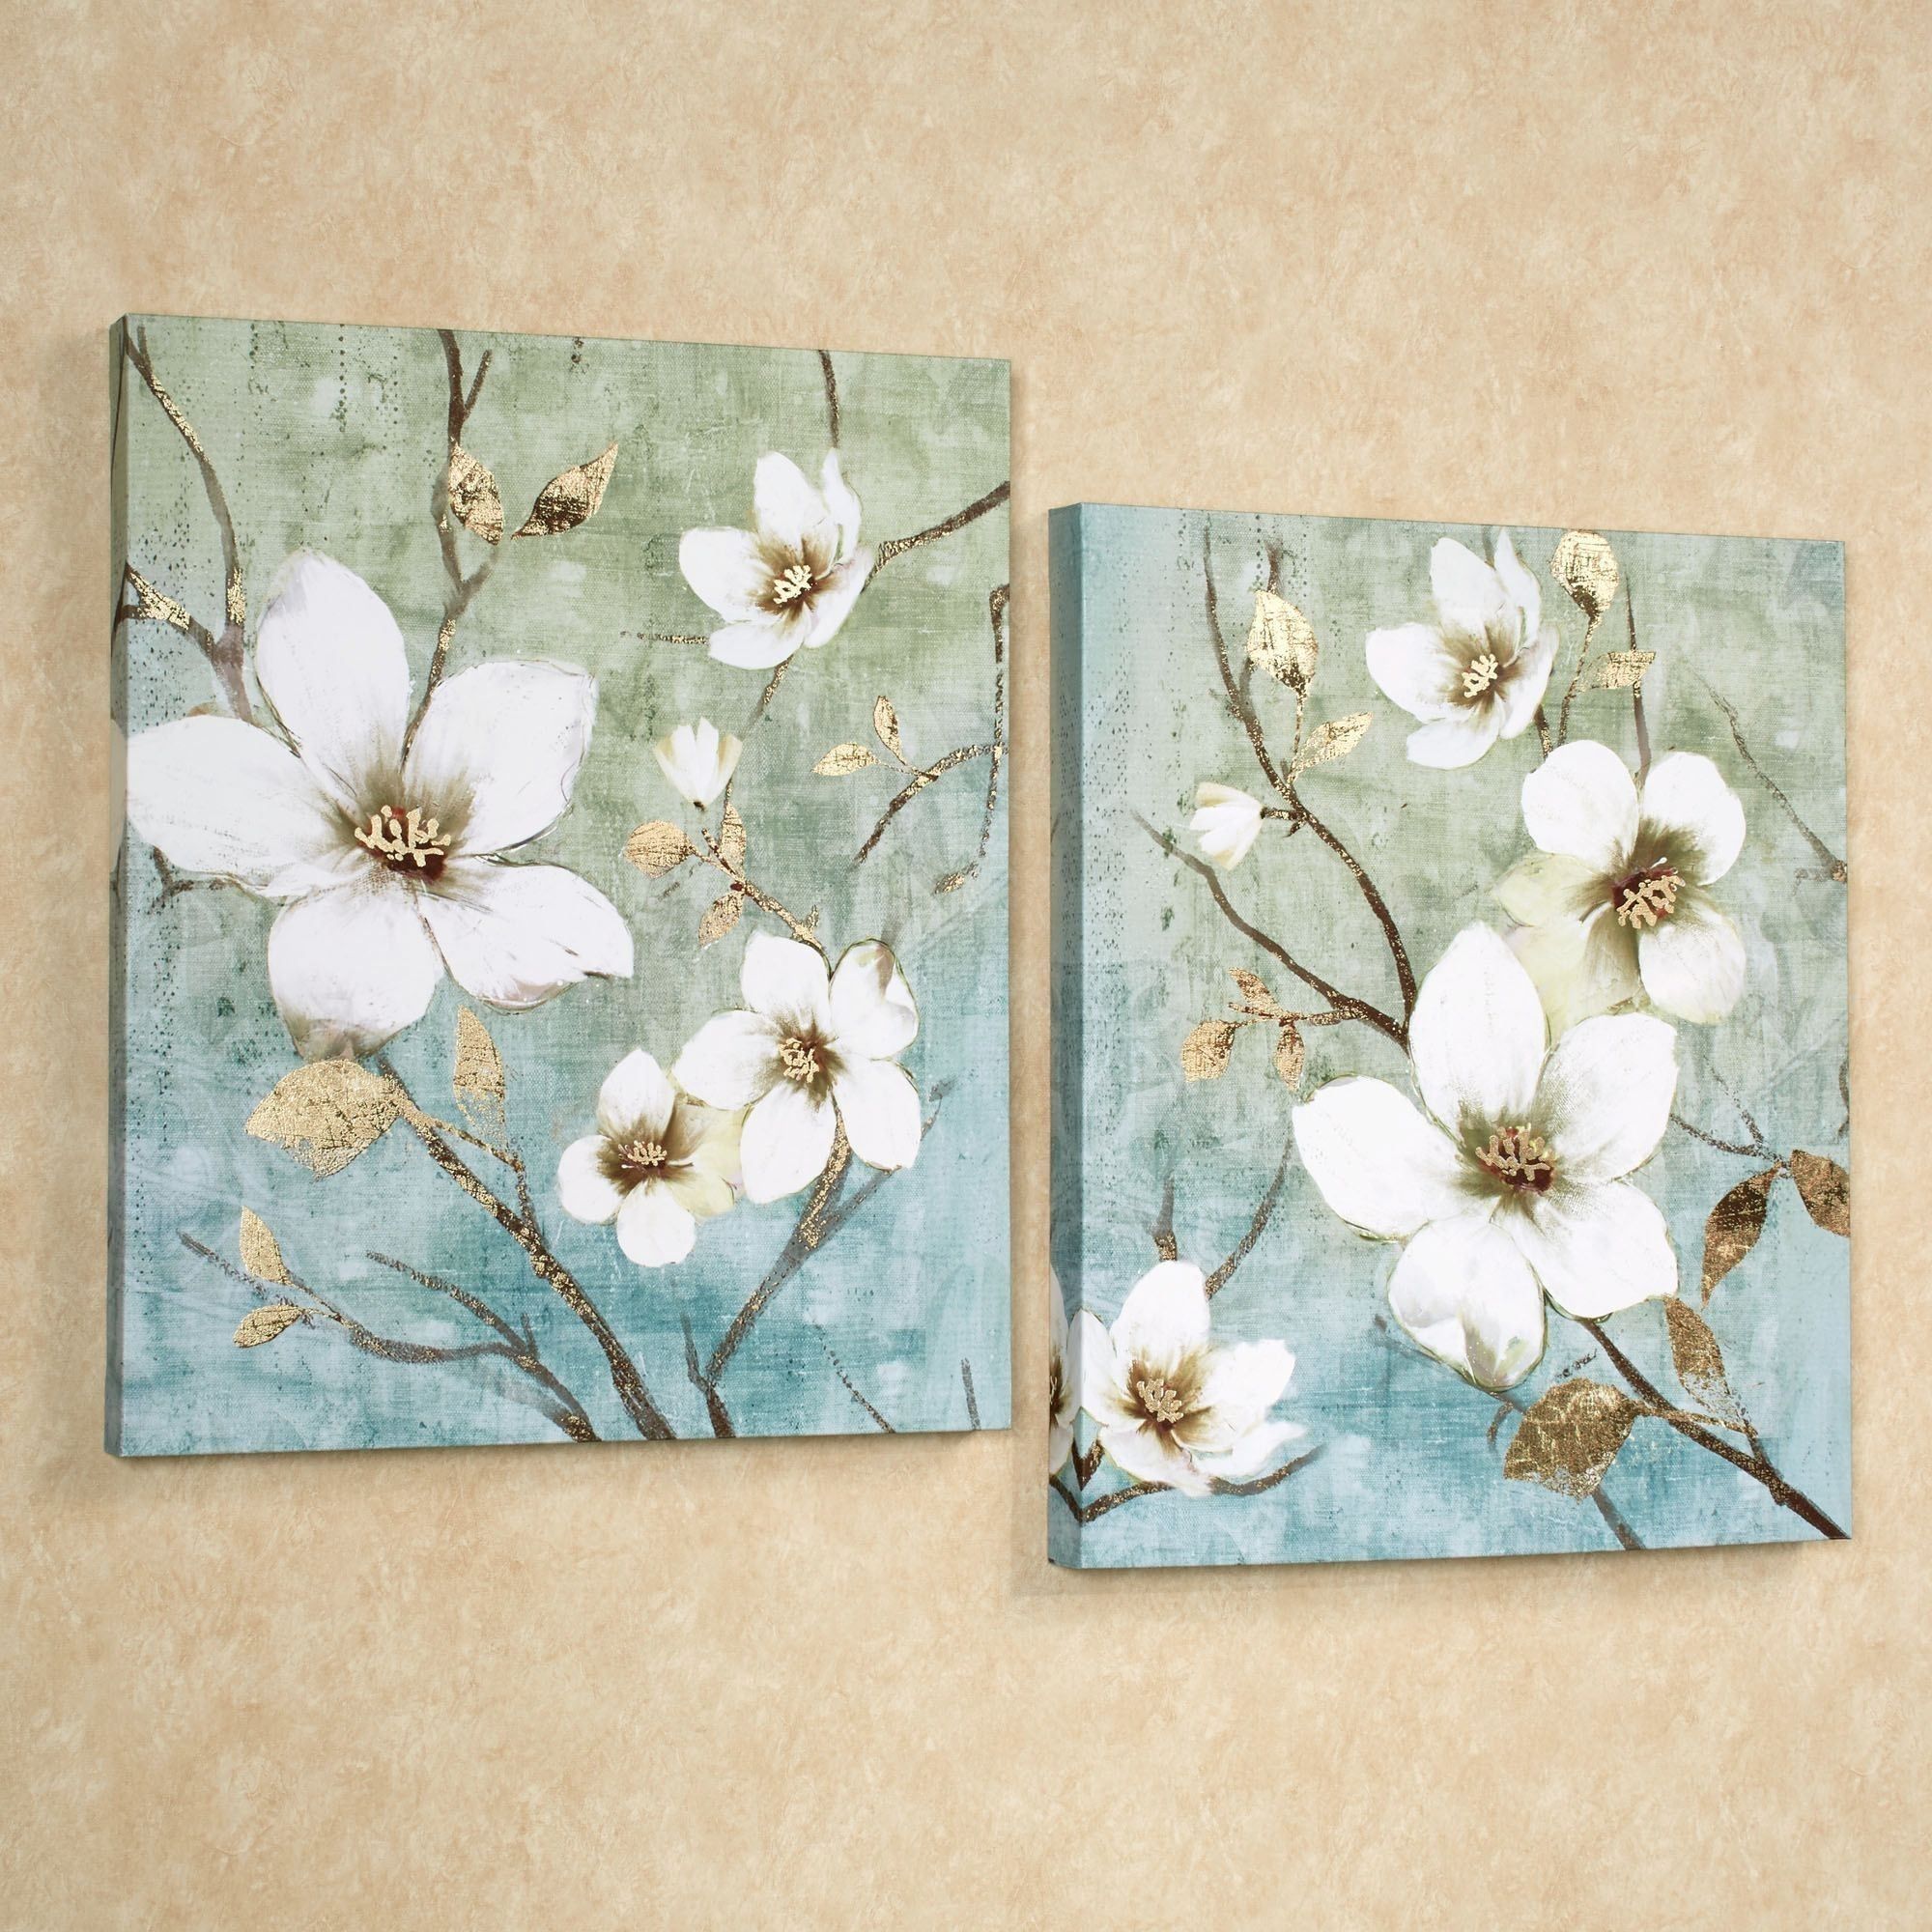 In Bloom Floral Canvas Wall Art Set | Art | Pinterest | Wall Art For Floral Canvas Wall Art (View 1 of 20)